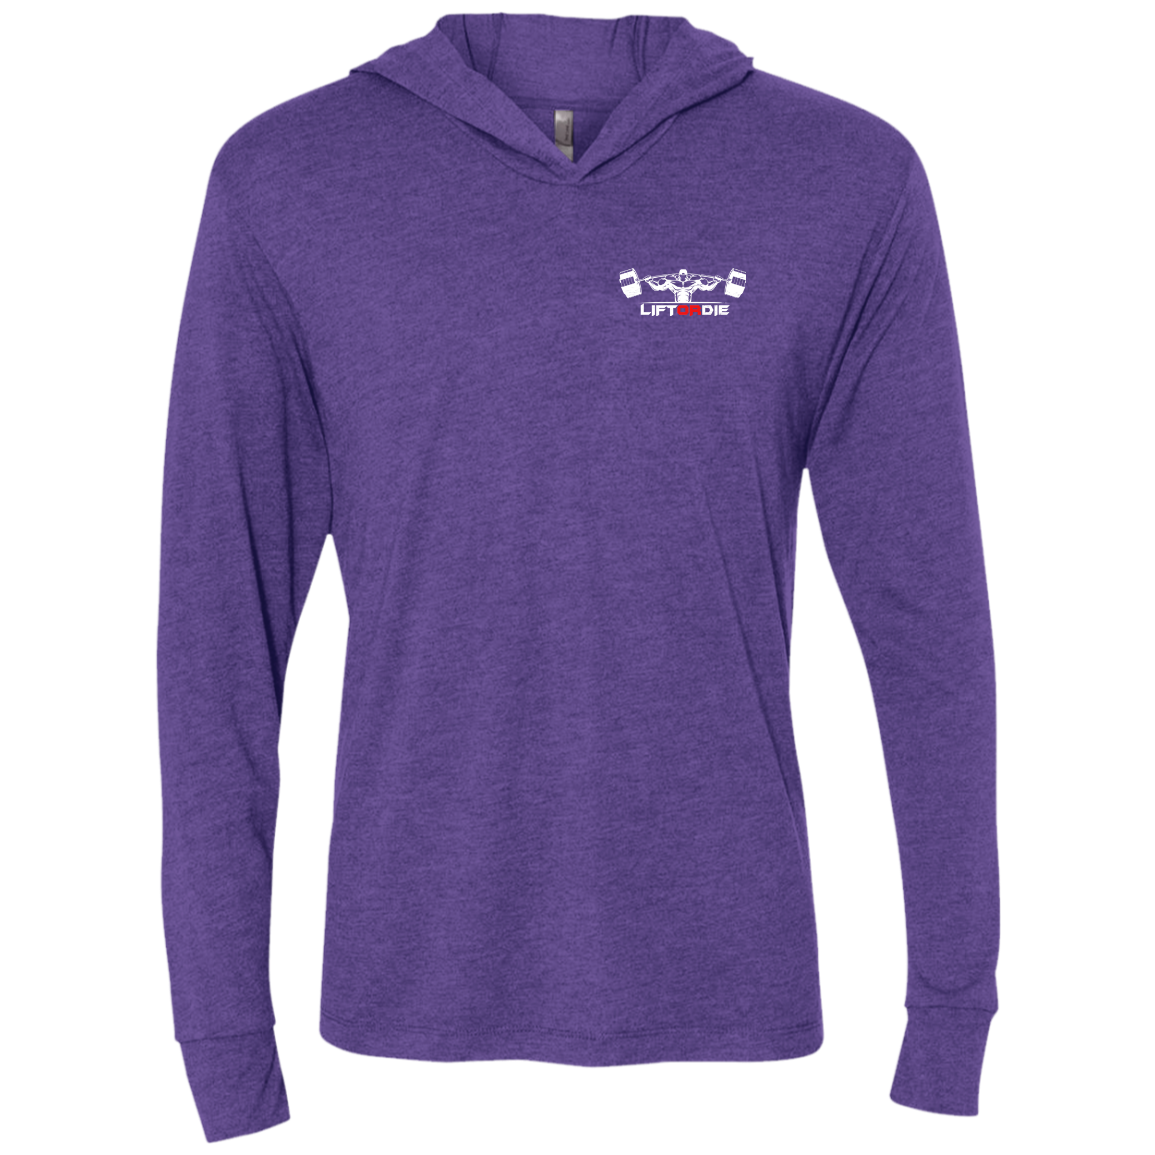 Lift or Die Triblend LS Hooded T-Shirt